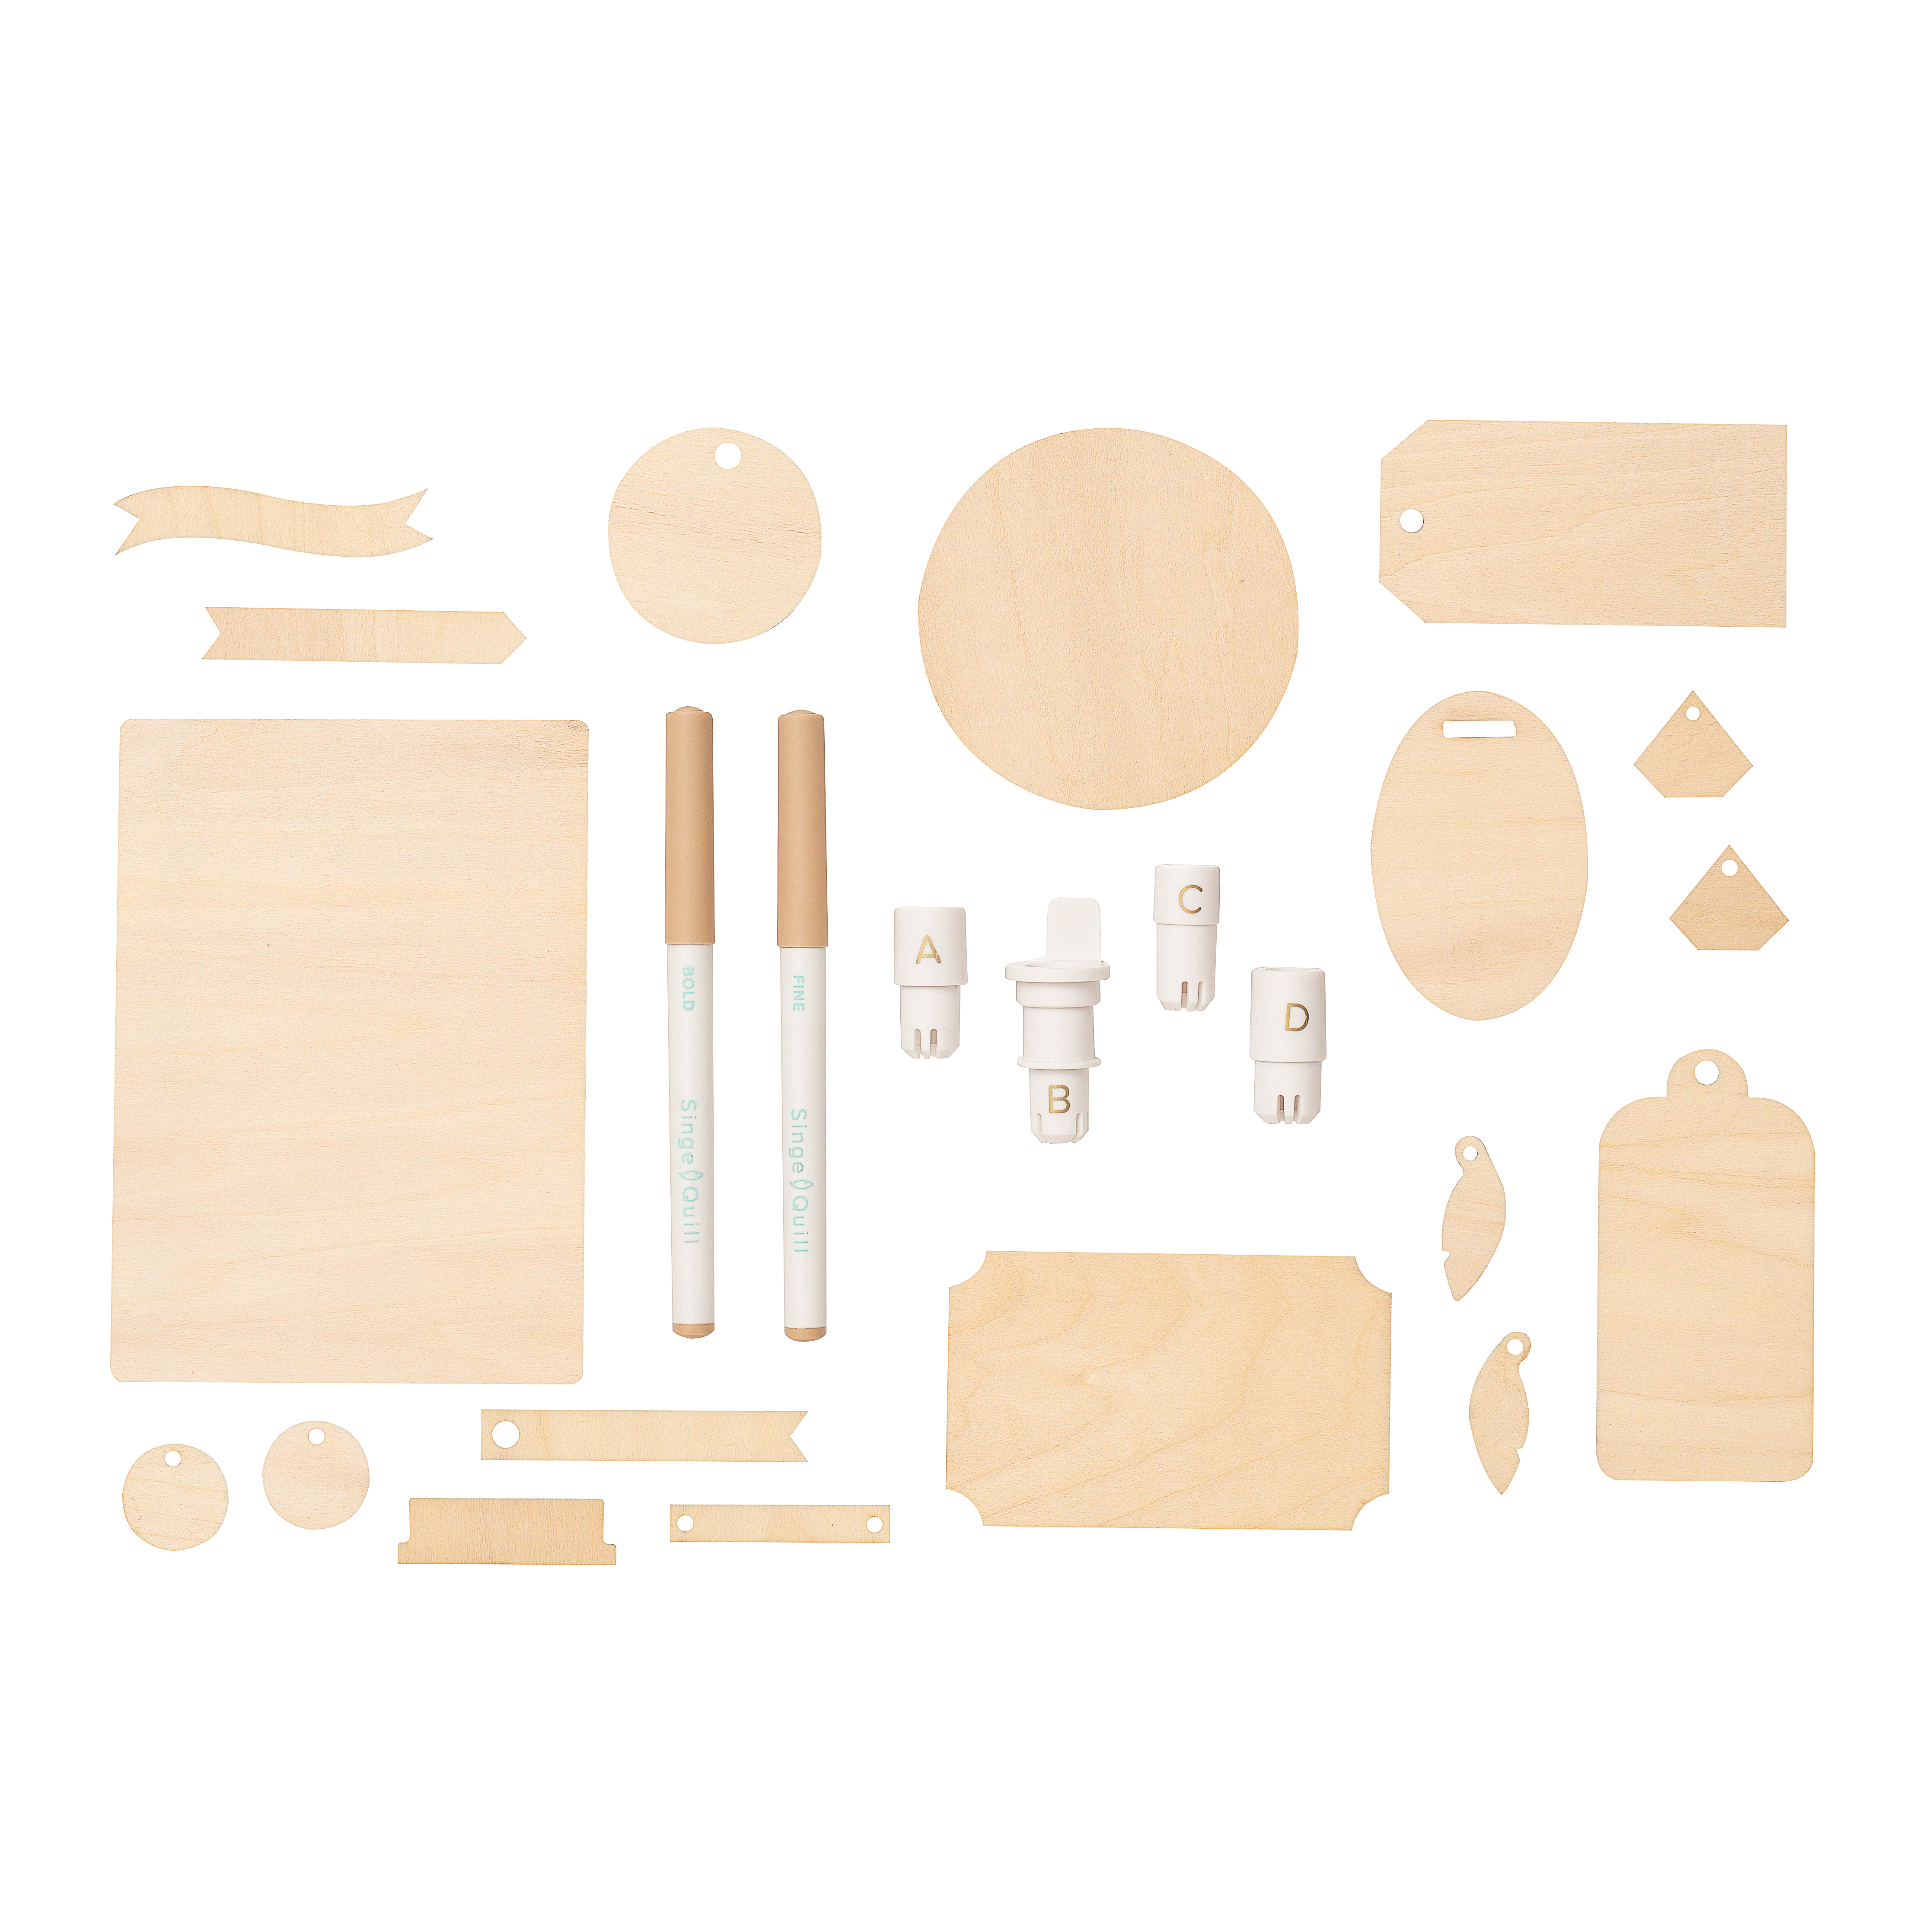 We R Makers • Quill singe quill starter kit 24pcs